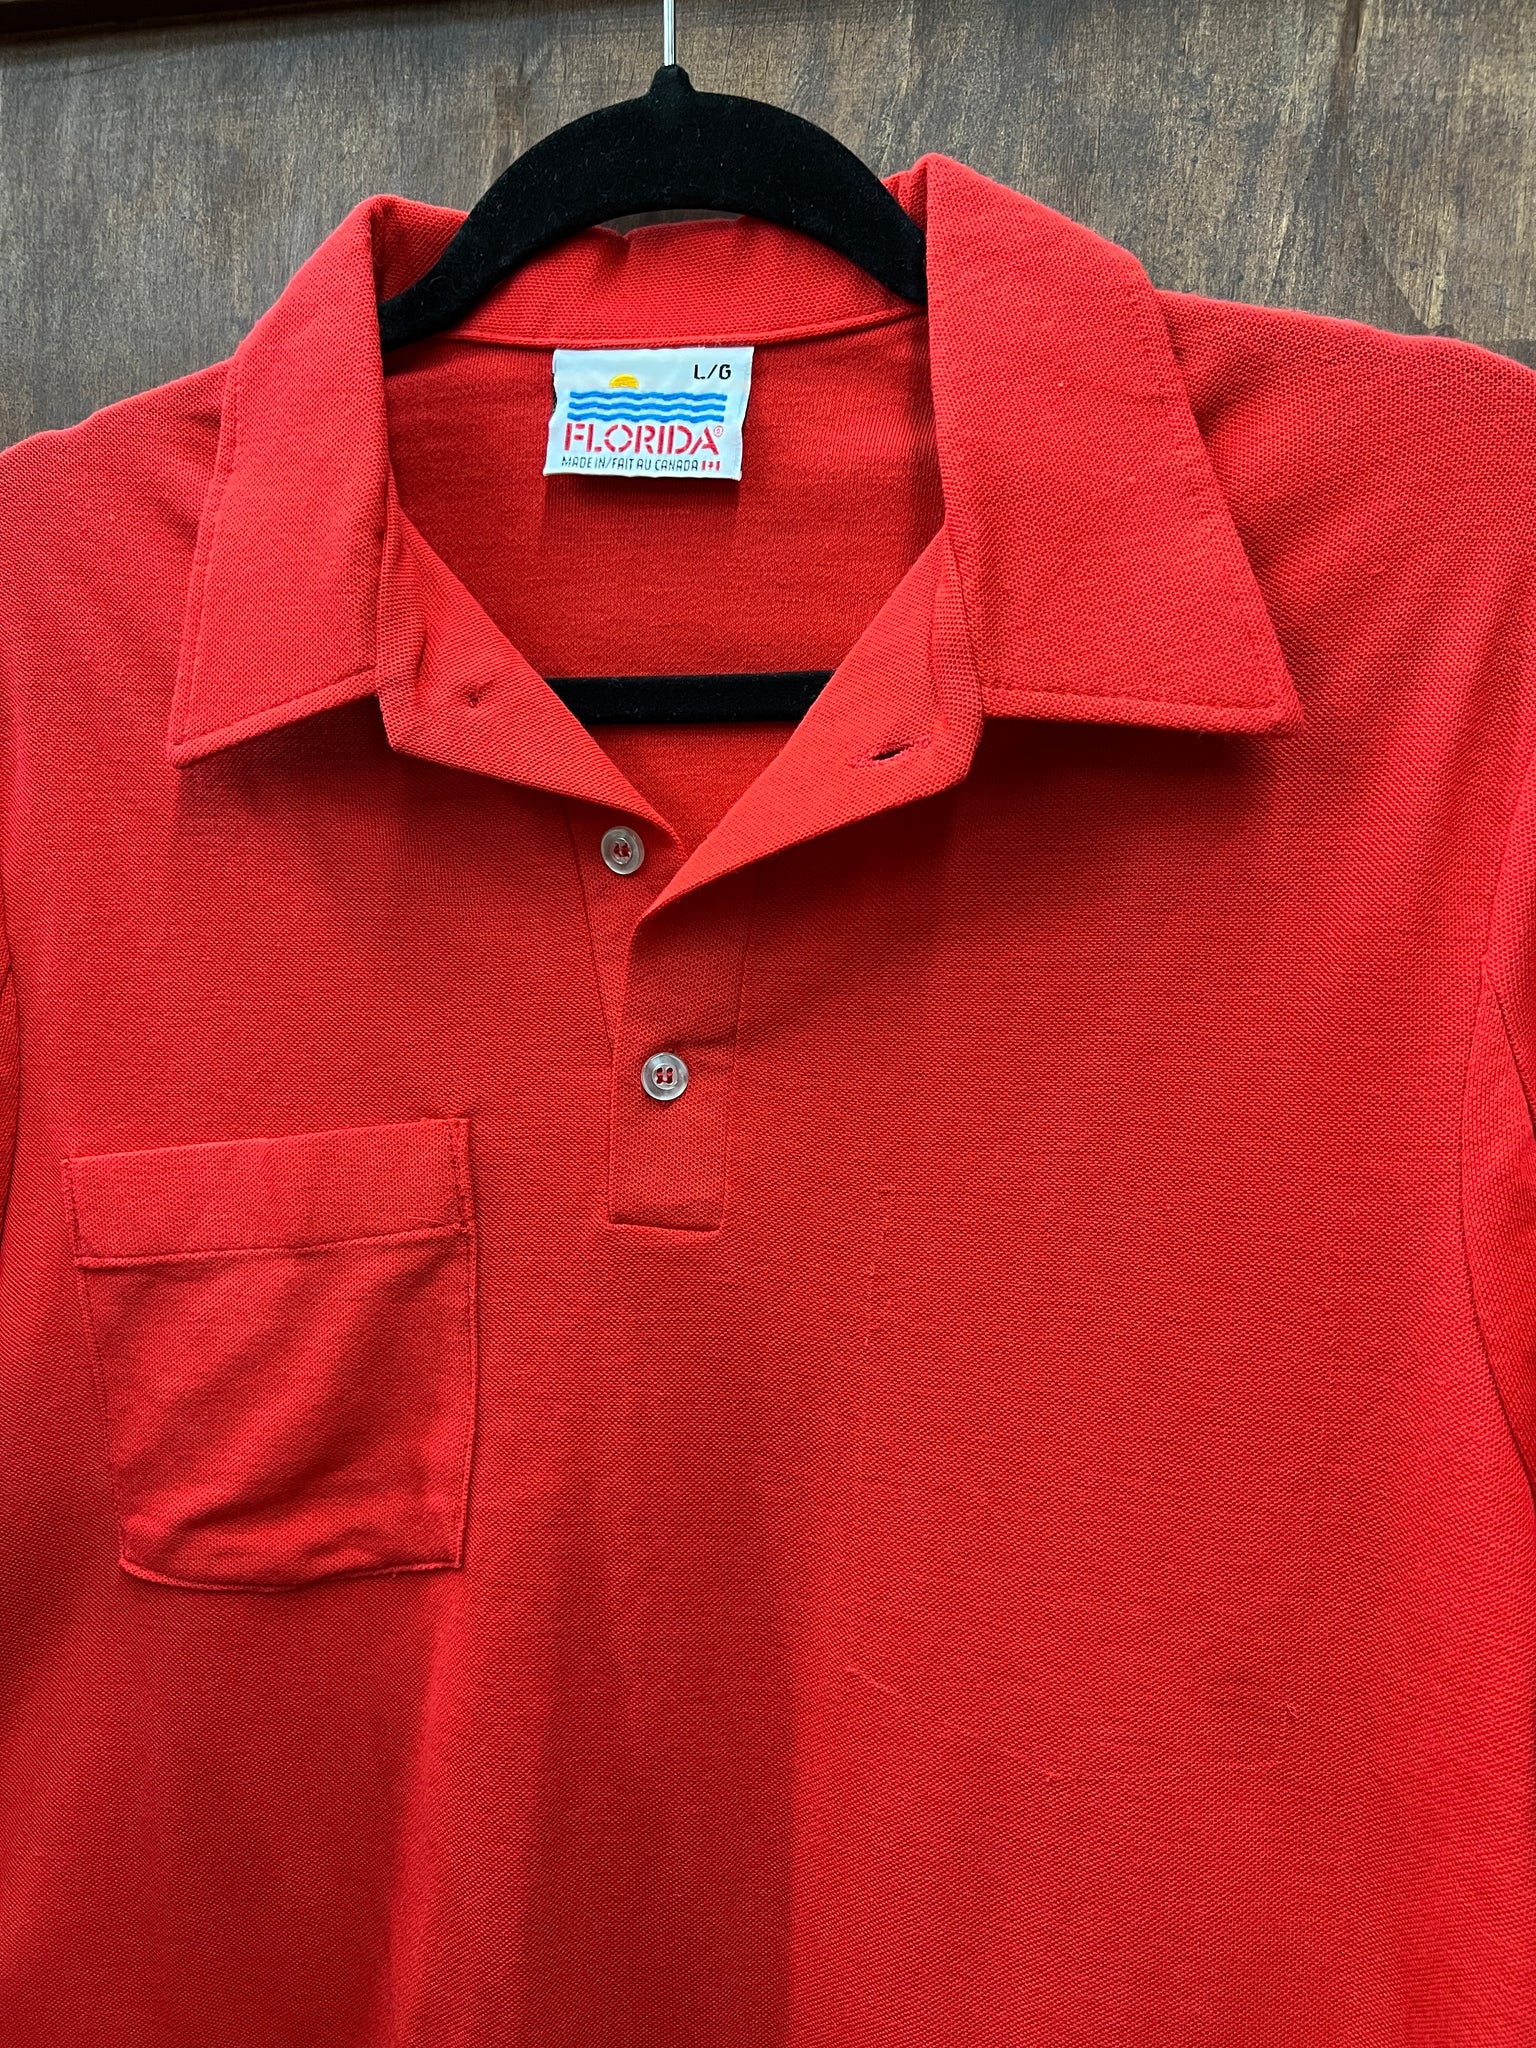 1970s MENS TOP- Florida red polo s/s (AS IS)